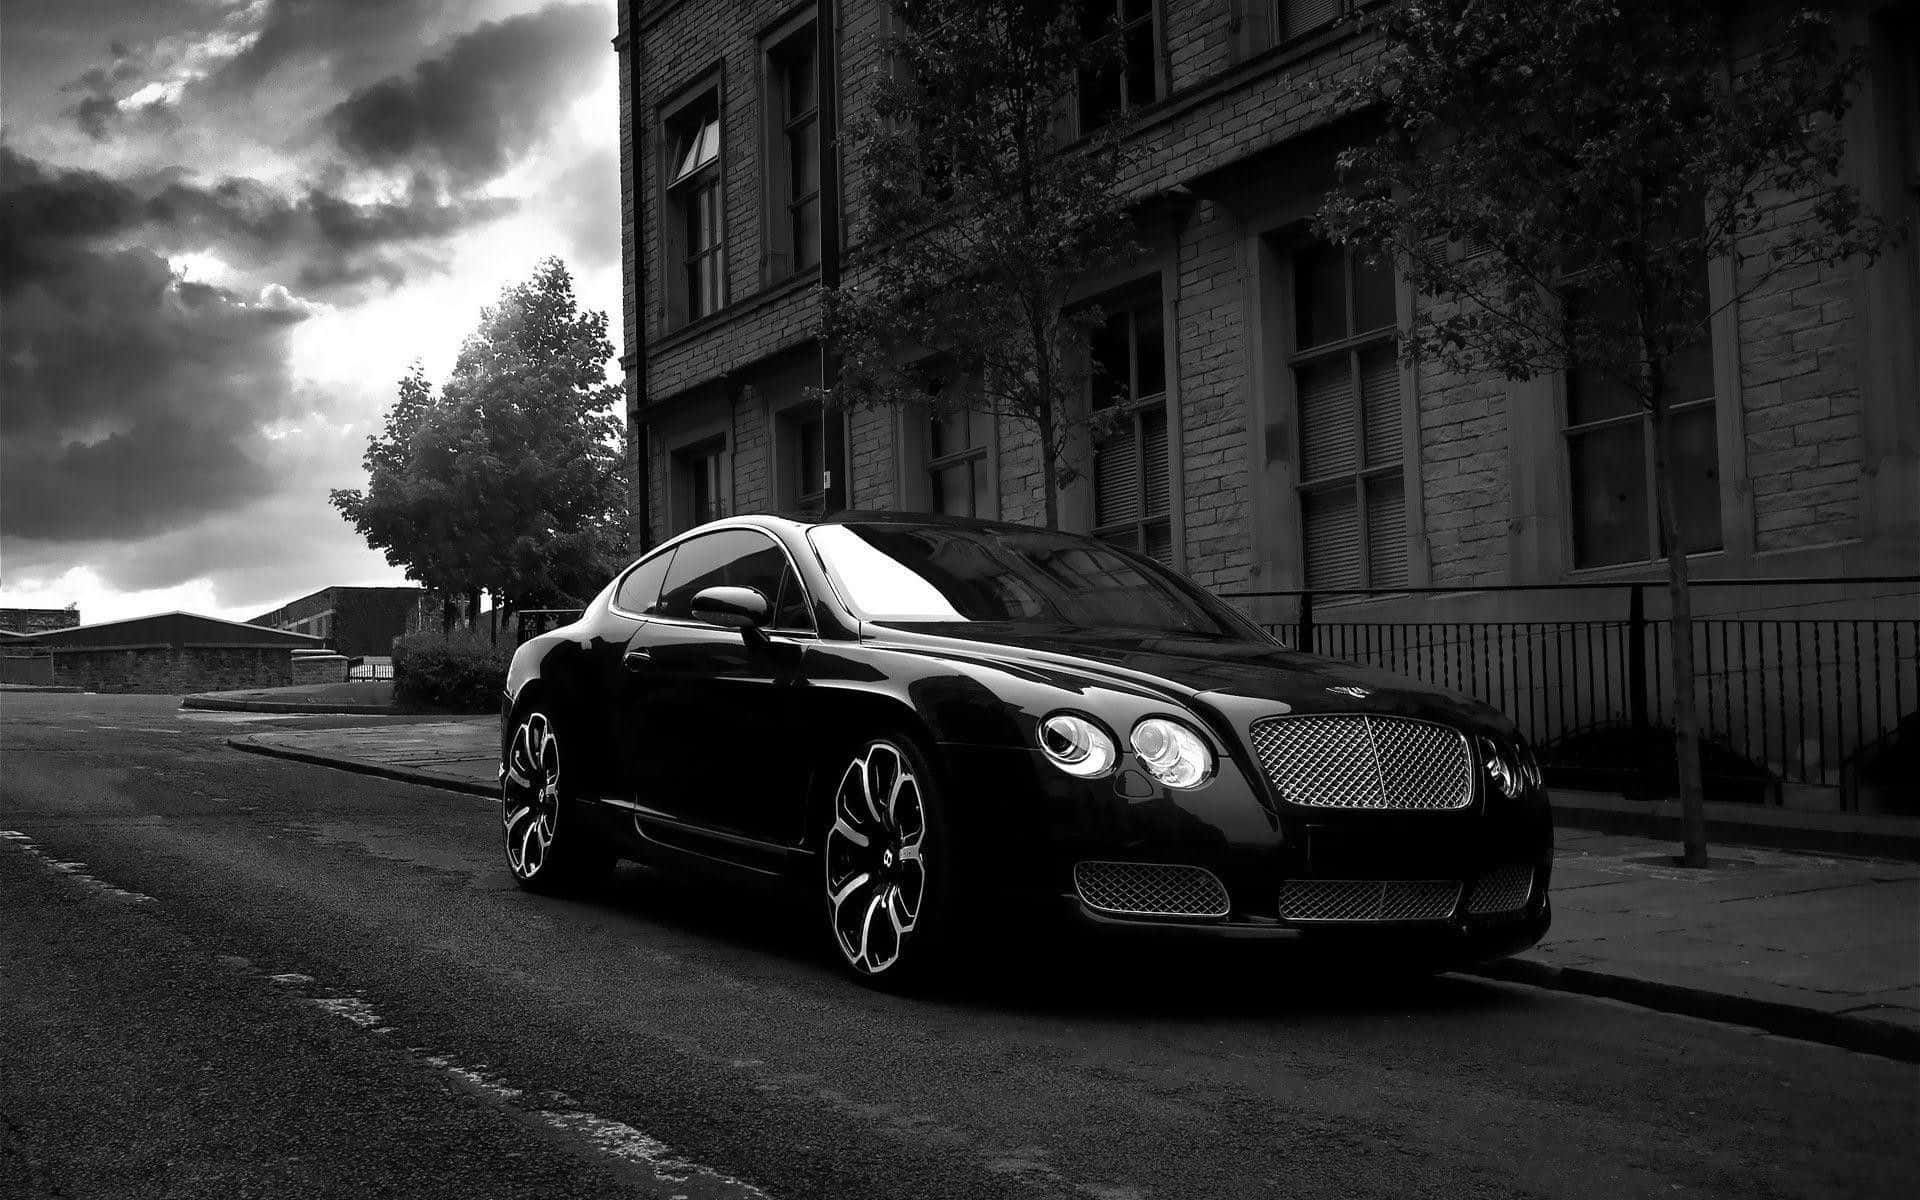 Enjoy the finer things in life with a Bentley